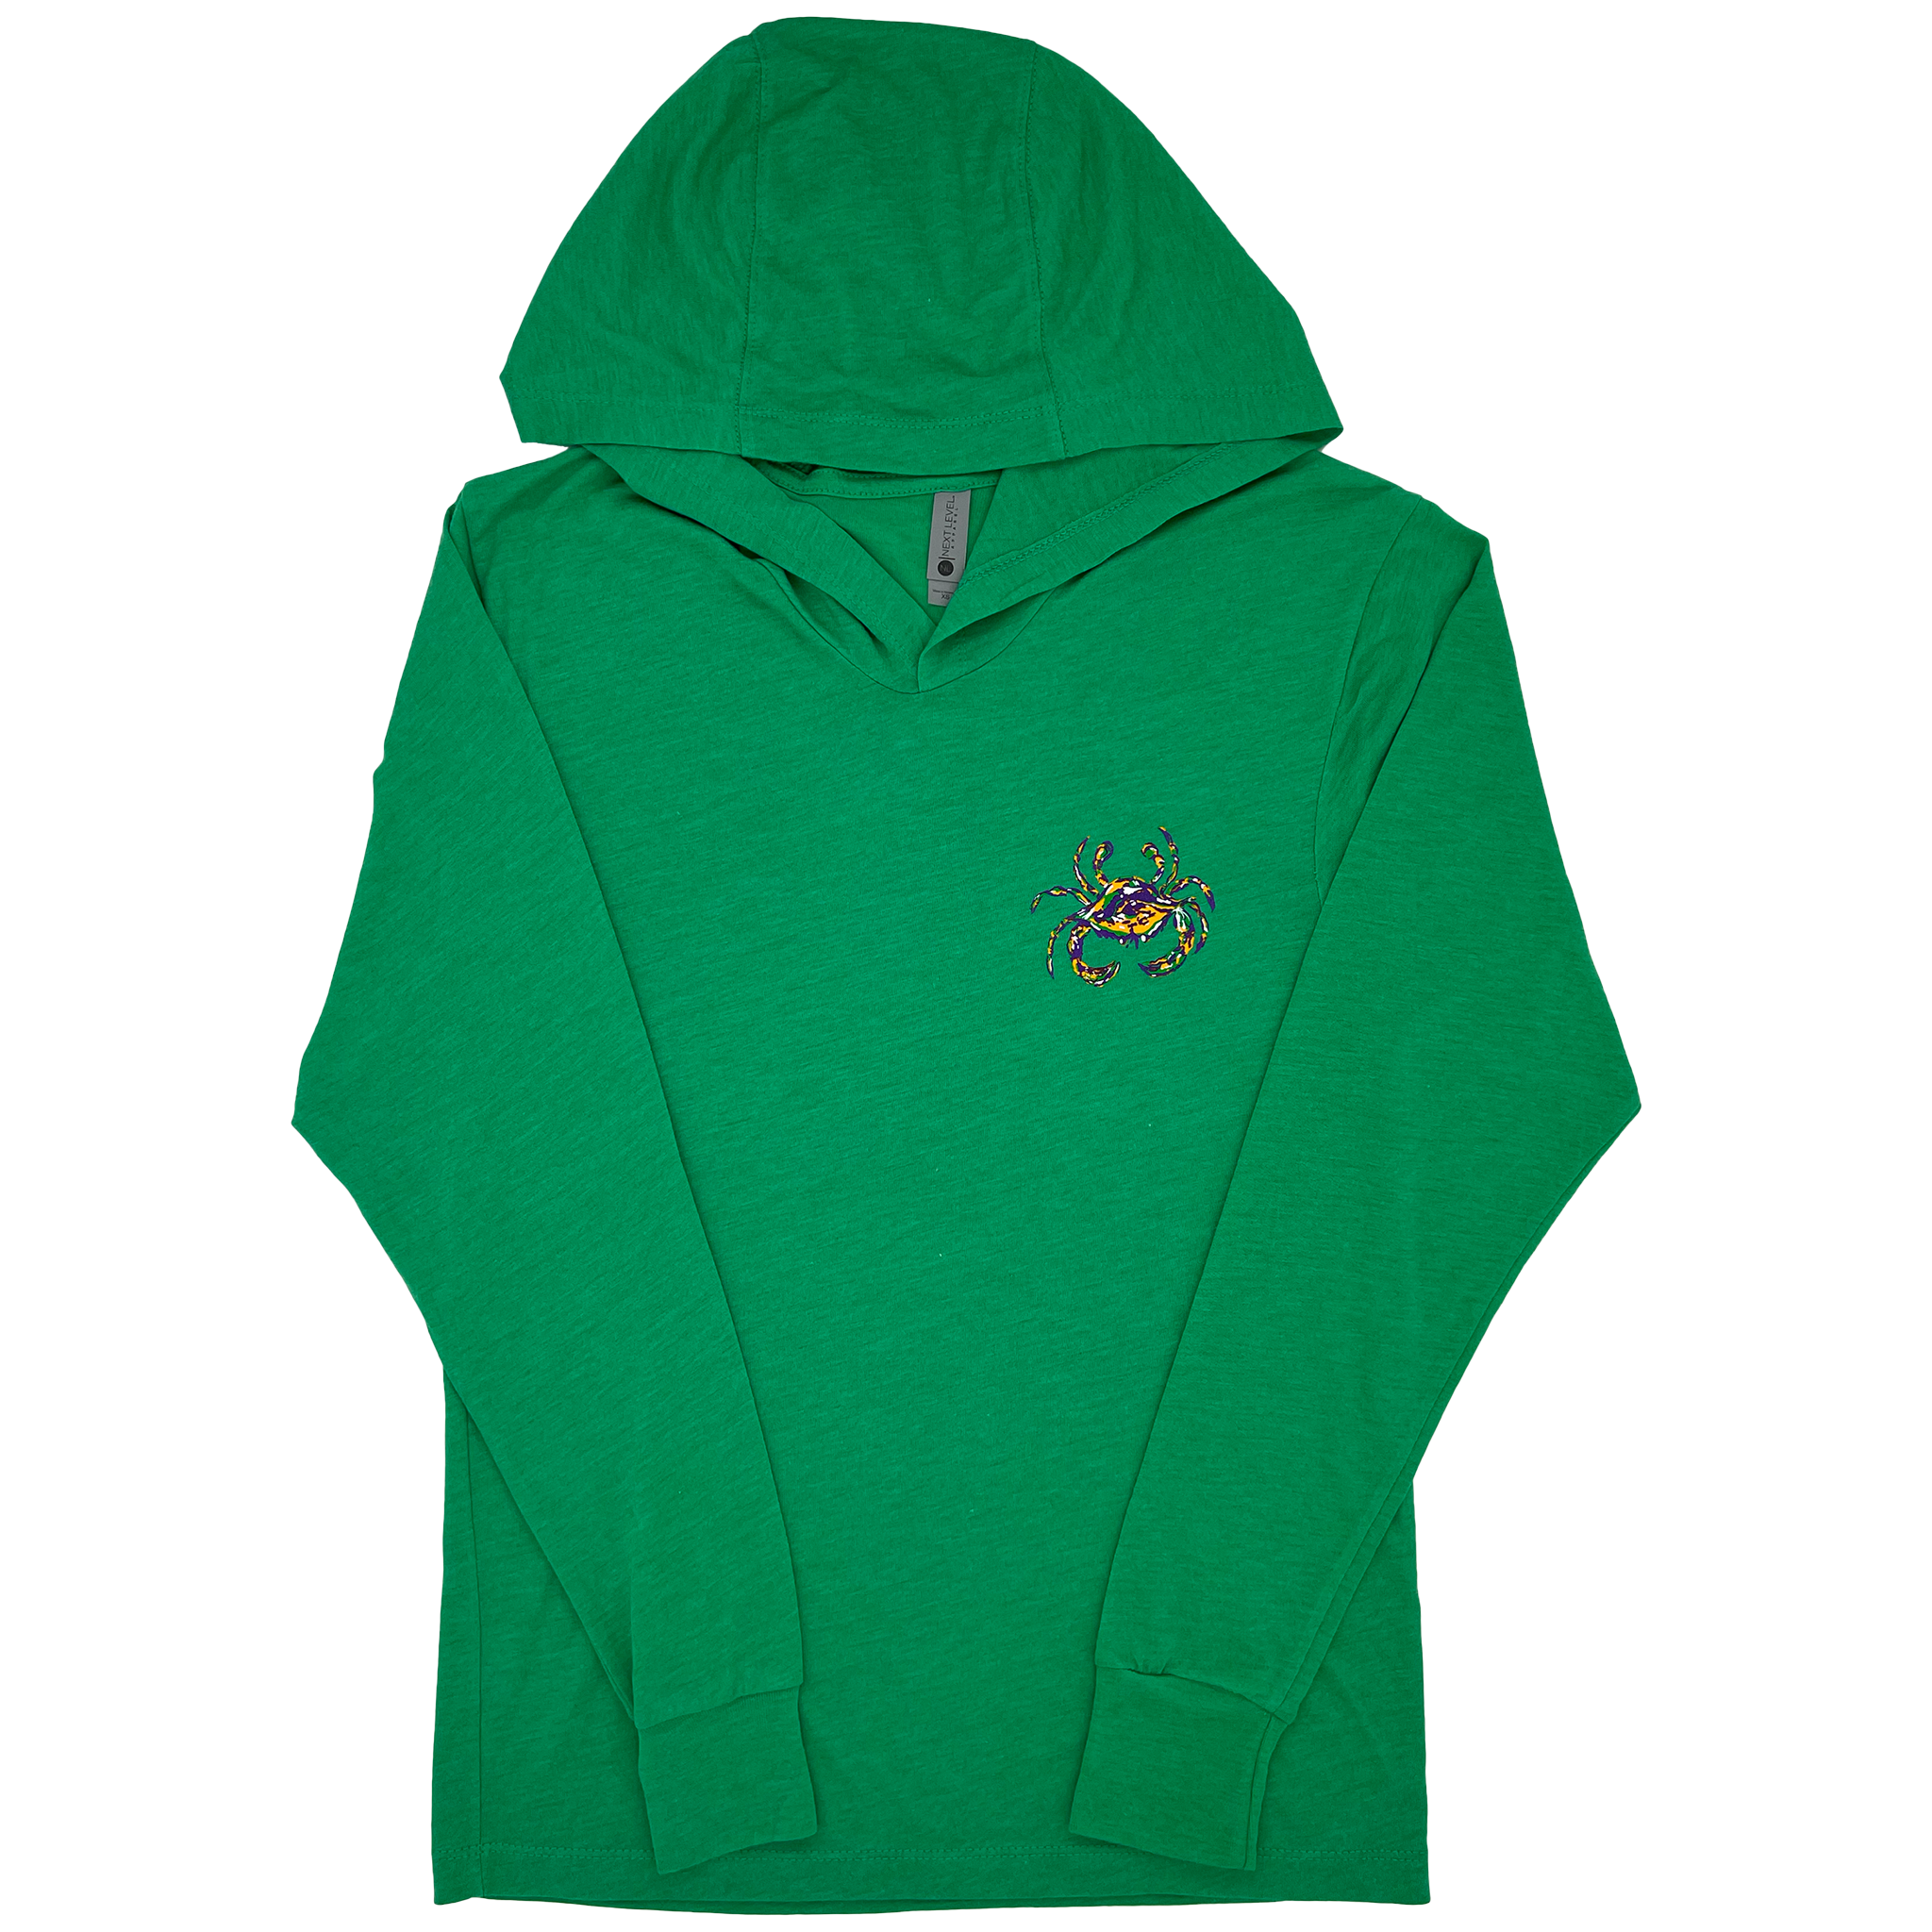 A heather green hooded t-shirt with a purple, green, and gold crab on the left chest.